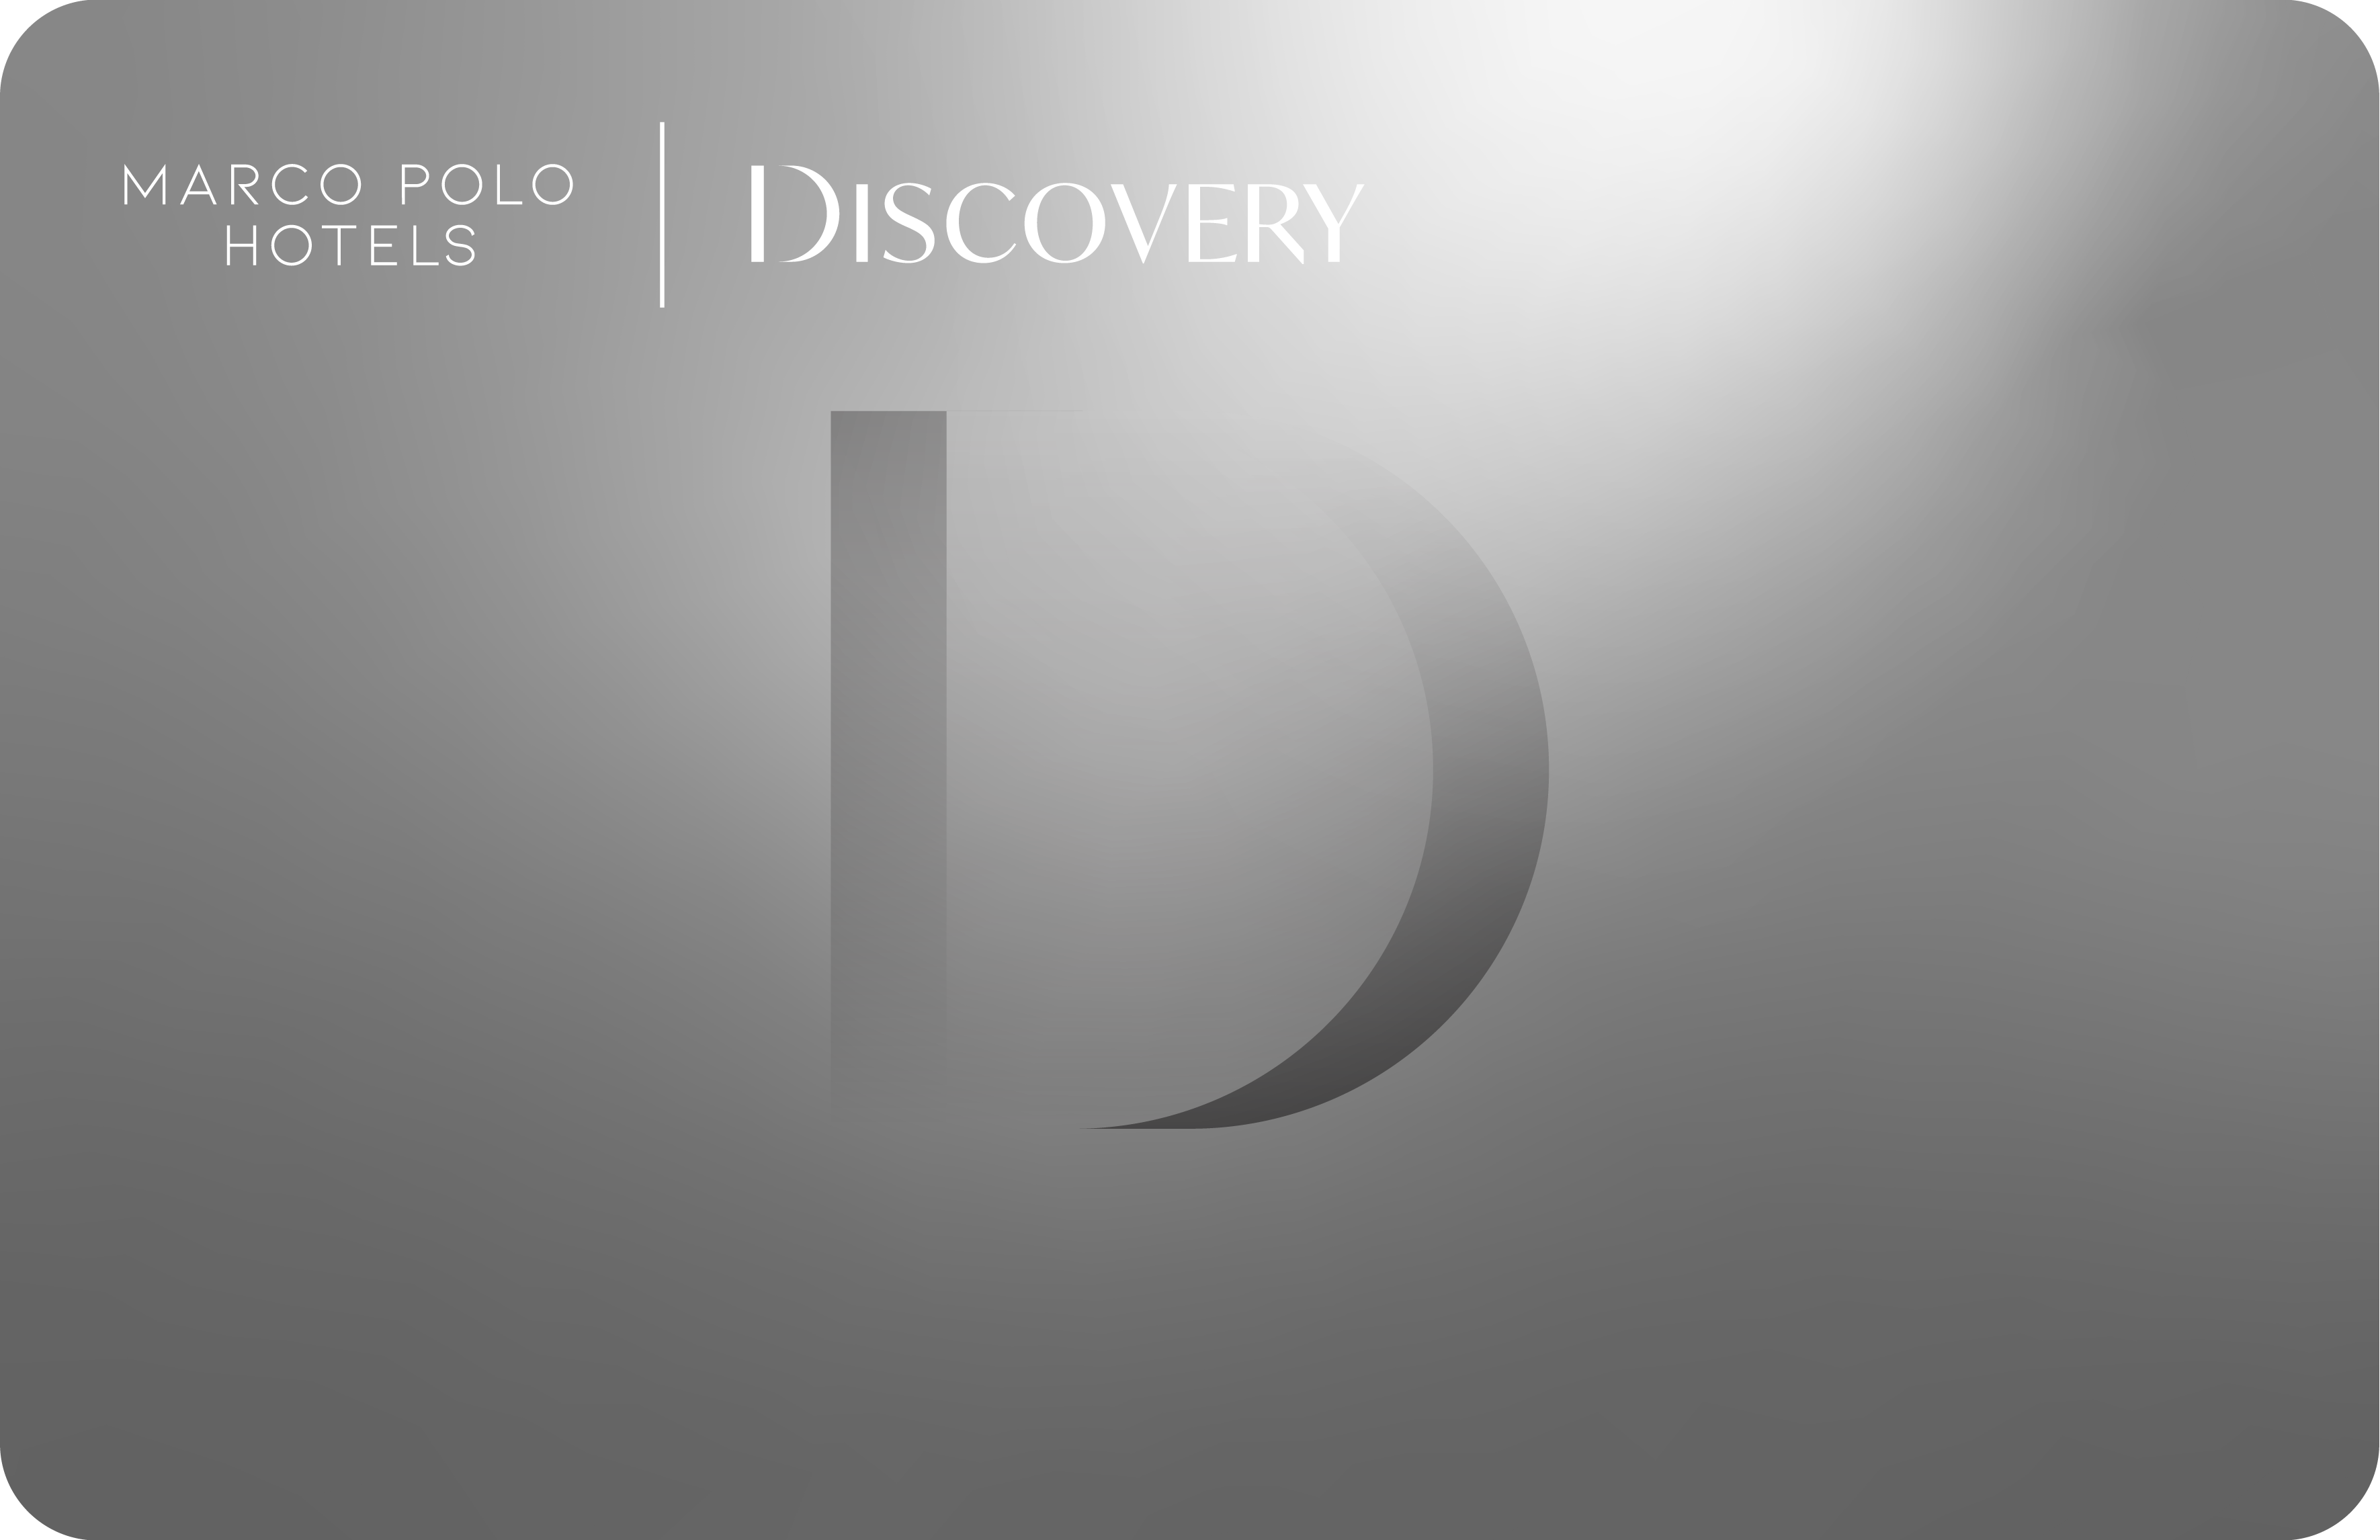 Platinum_Marco Polo DISCOVERY